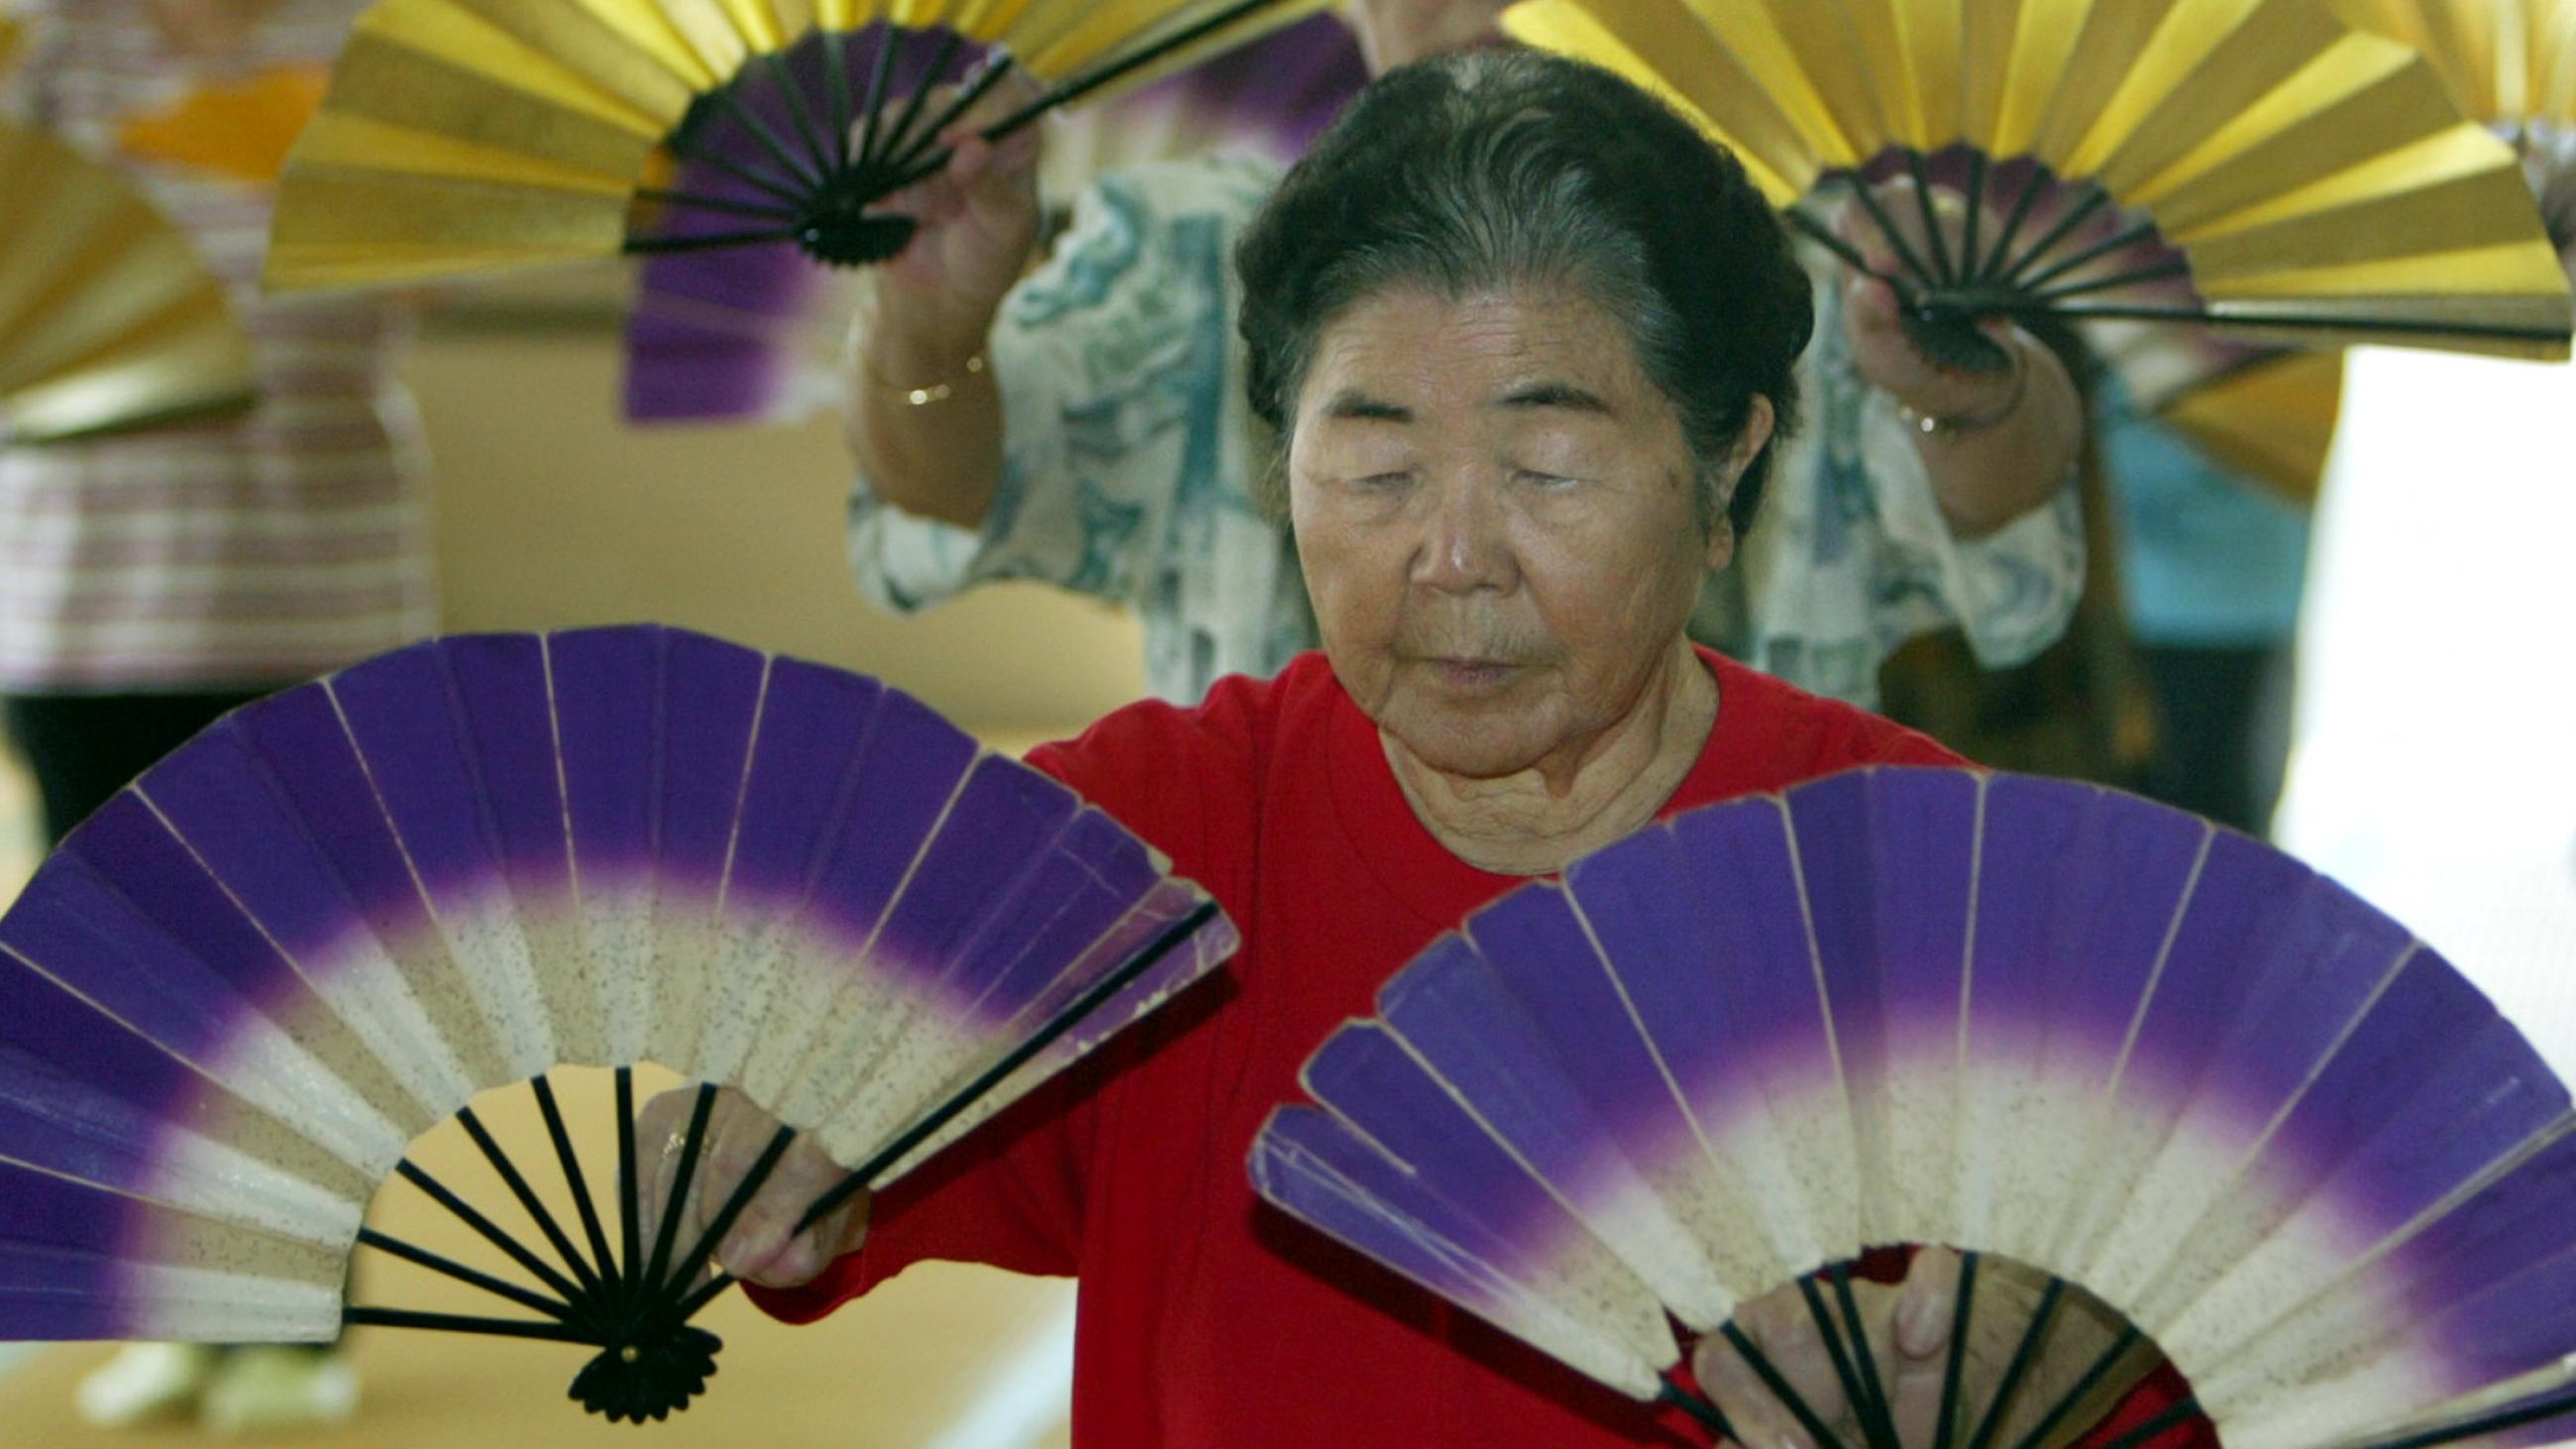 An elderly japanese woman wearing a red t shirt dances holding white and purple fans, in a group